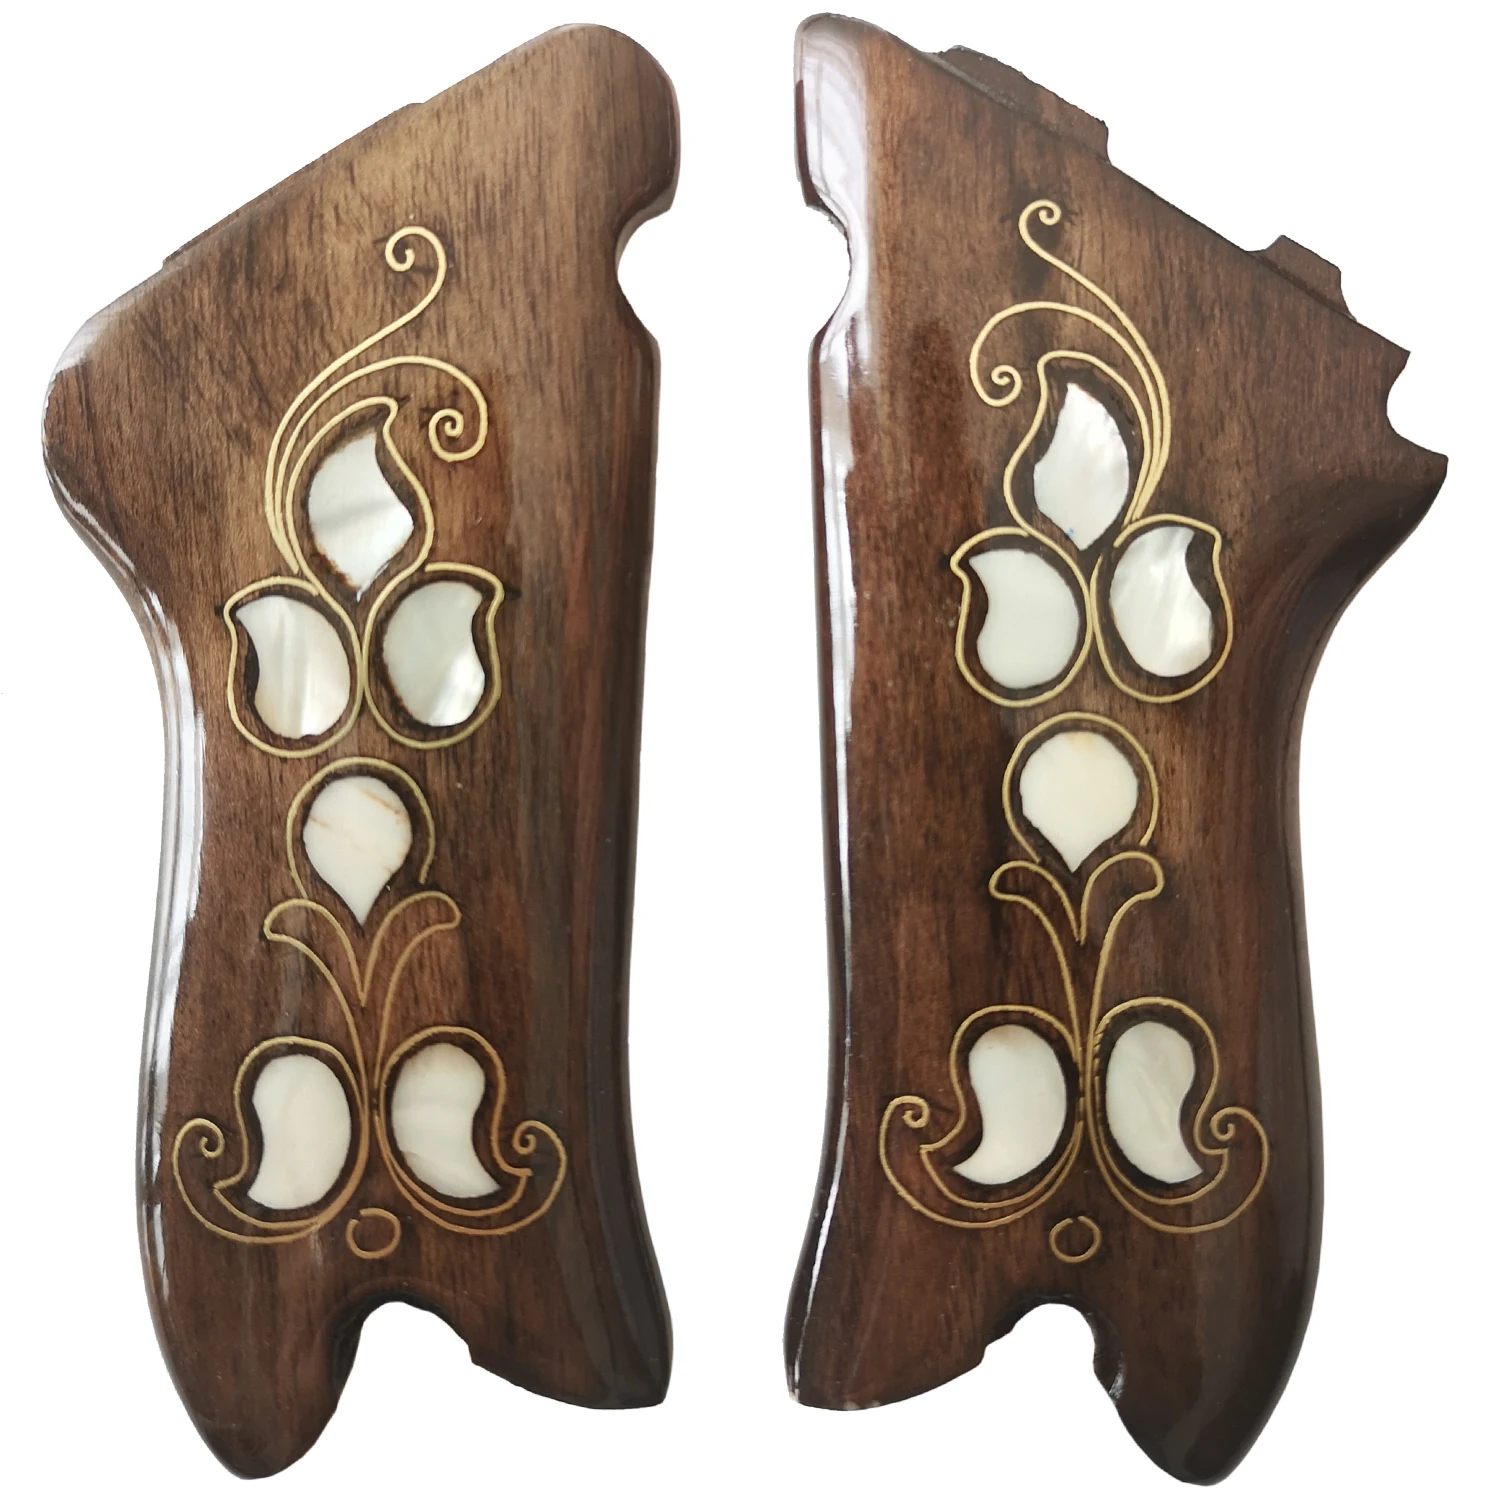 

Luger P-08 Parabellum Compatible Wooden Handle Set with Mother-of-Pearl Detail